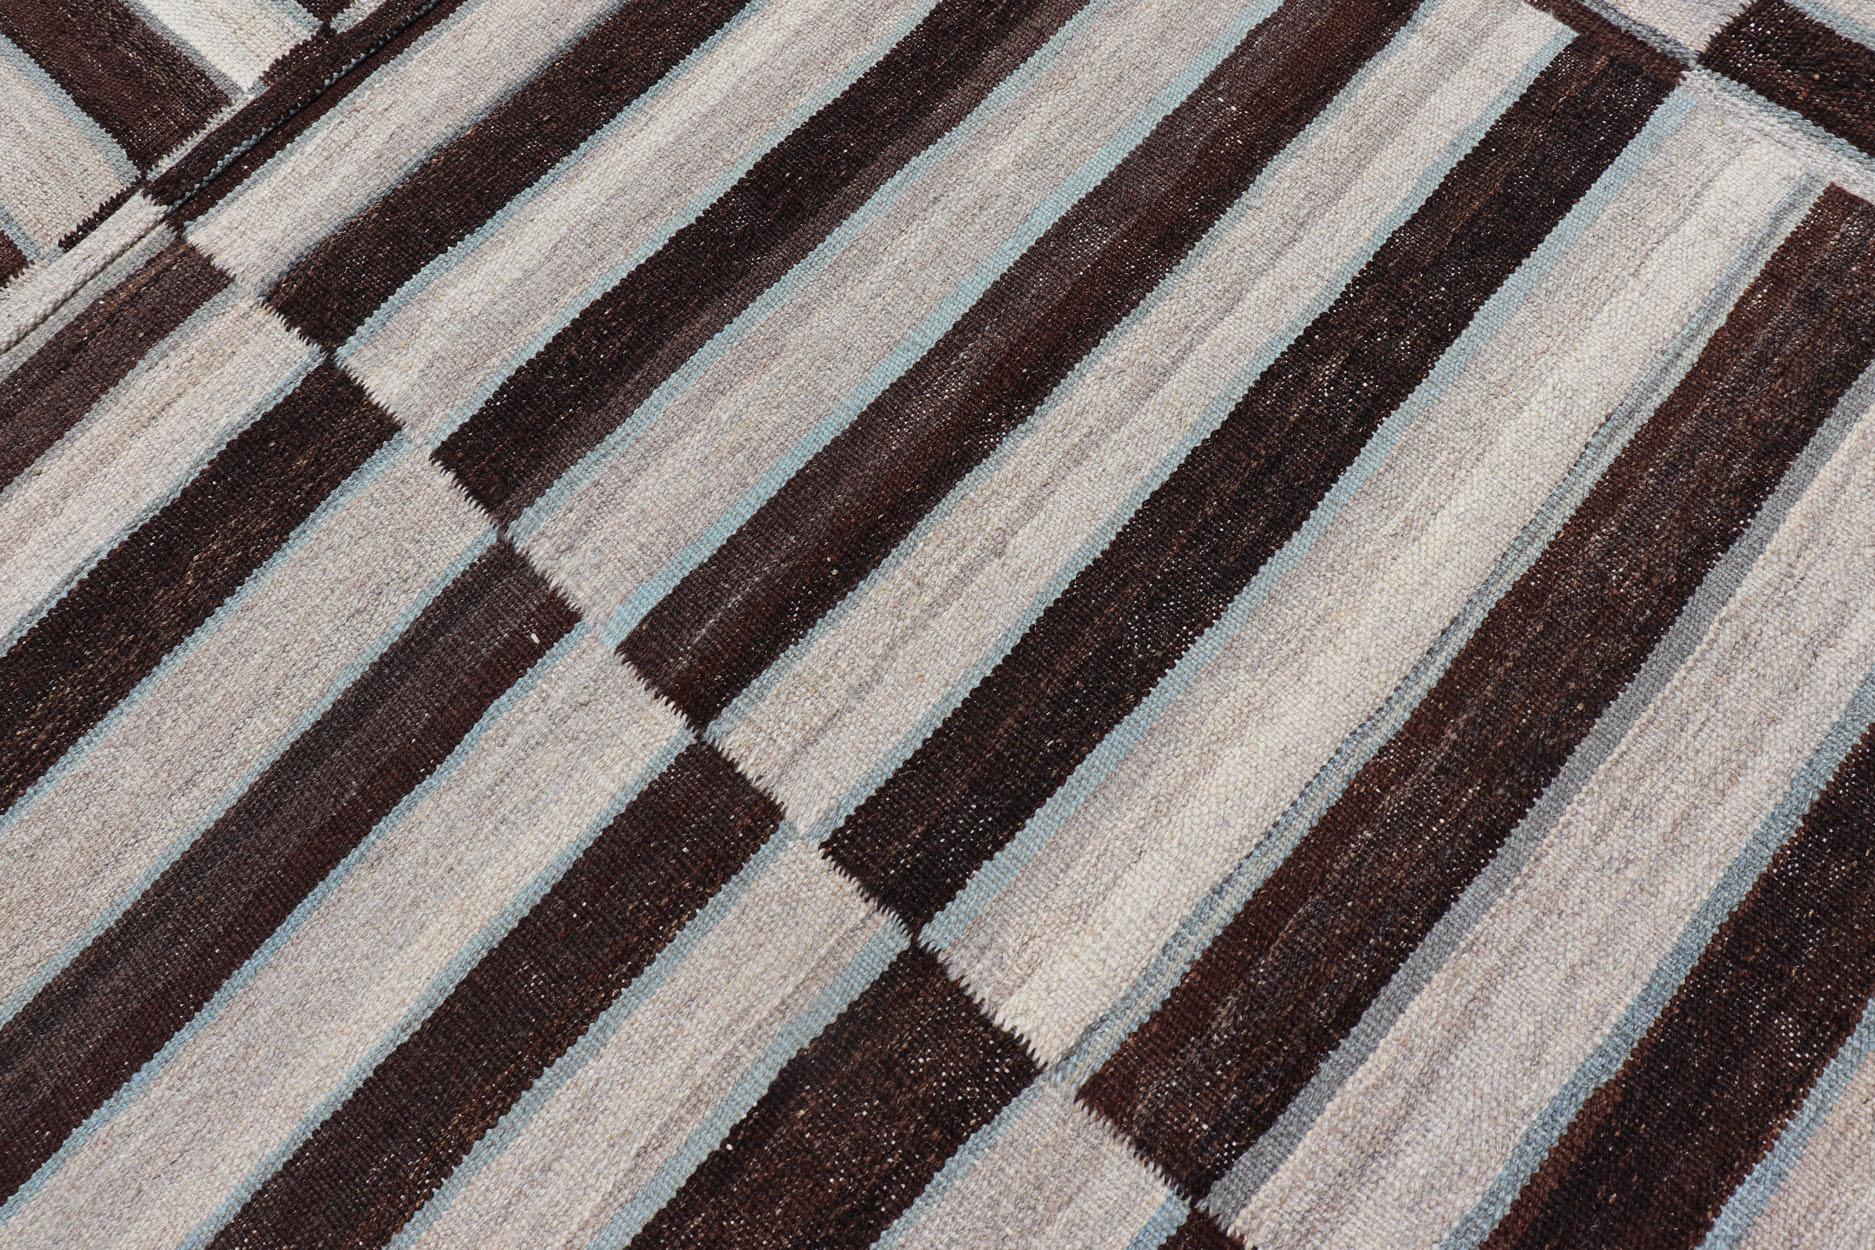 Modern Kilim Rug in Multi-Panel Striped Design with Chocolate Brown, cream  For Sale 5